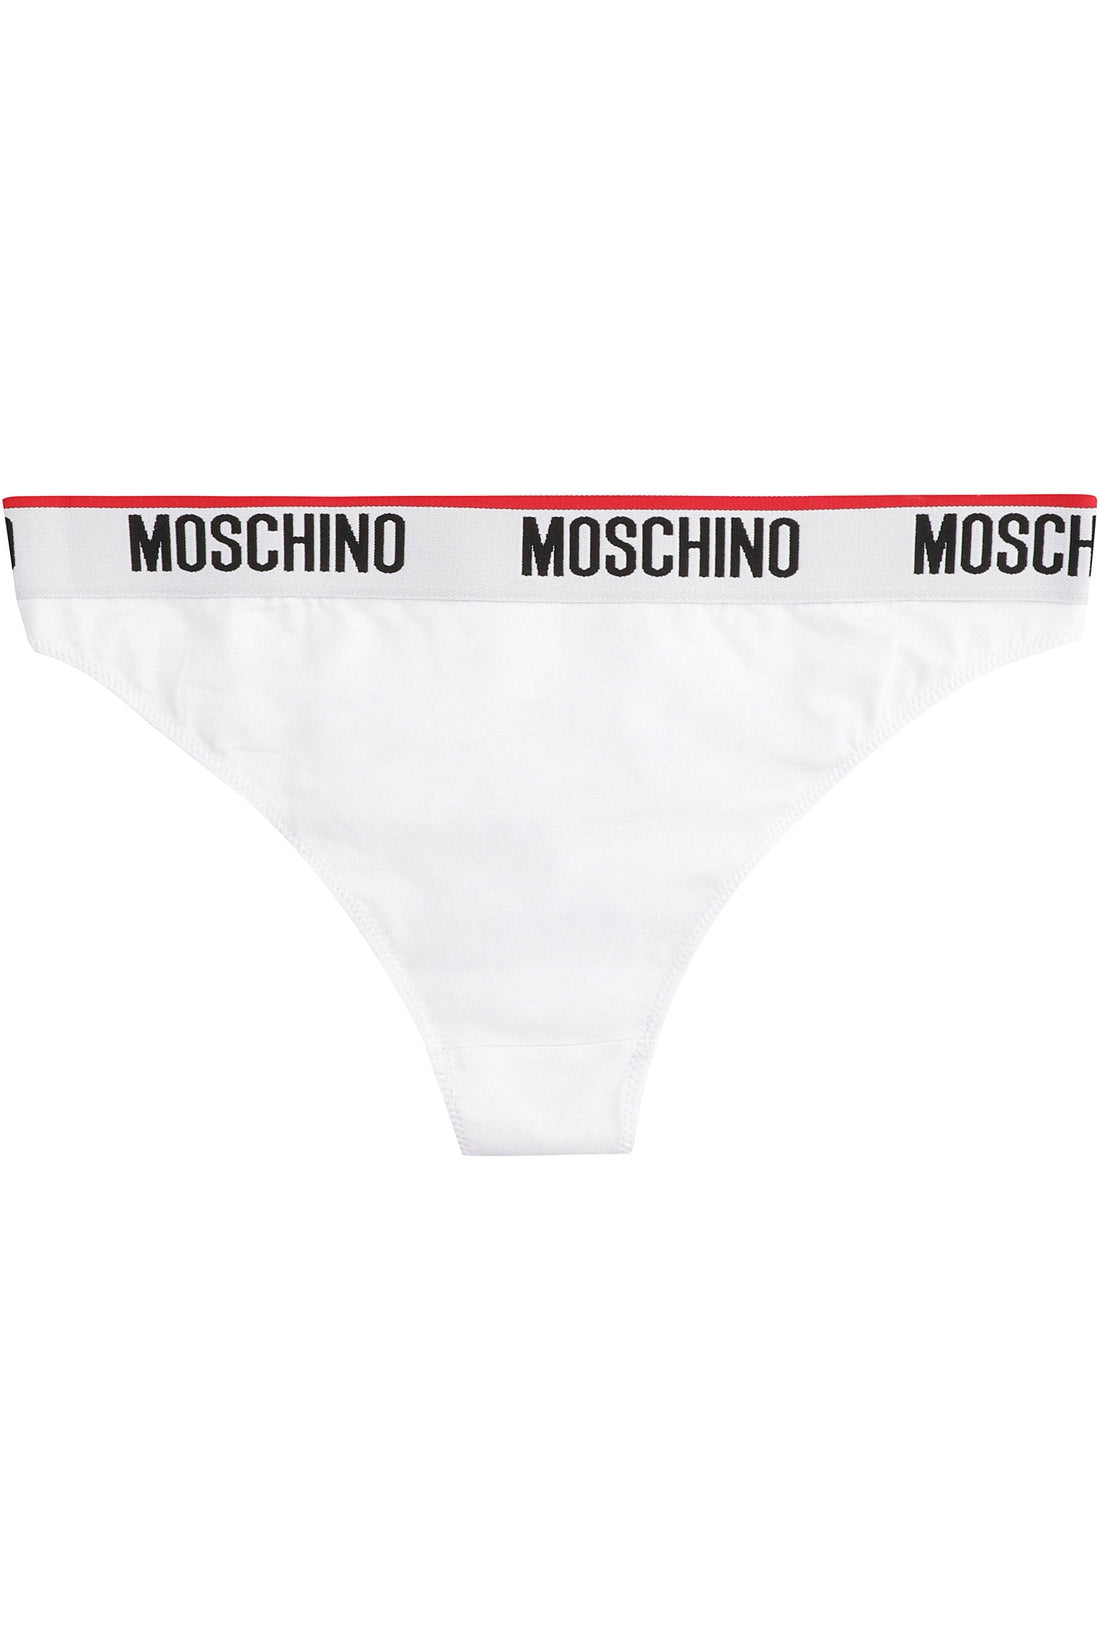 Moschino-OUTLET-SALE-Set of two Logo band briefs-ARCHIVIST